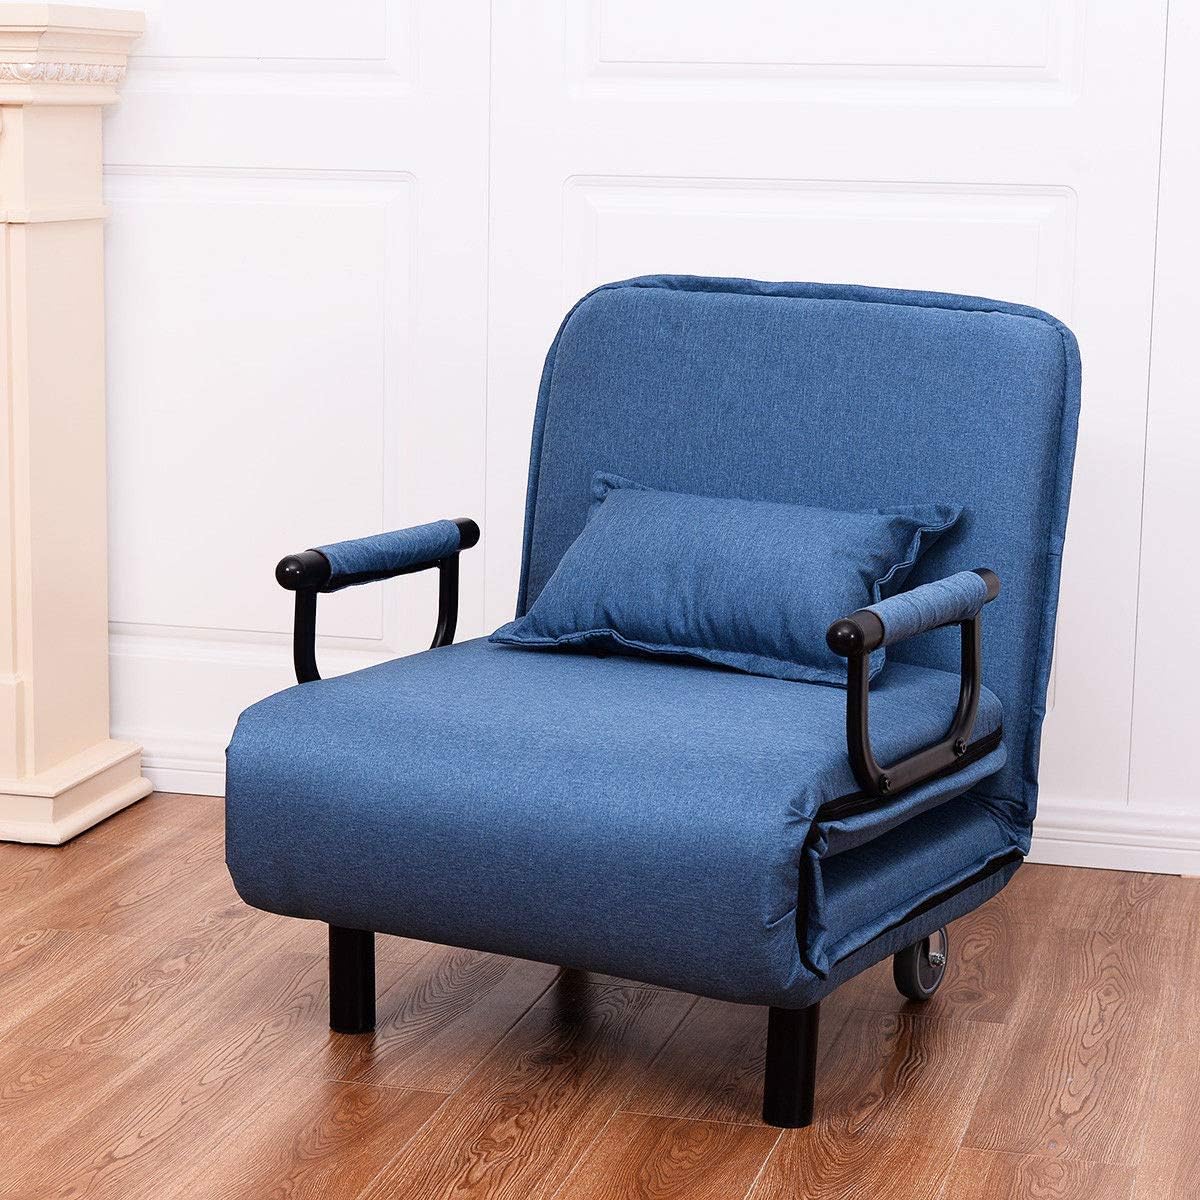 26.5" Folding Arm Chair  can Convertible Sofa Bed